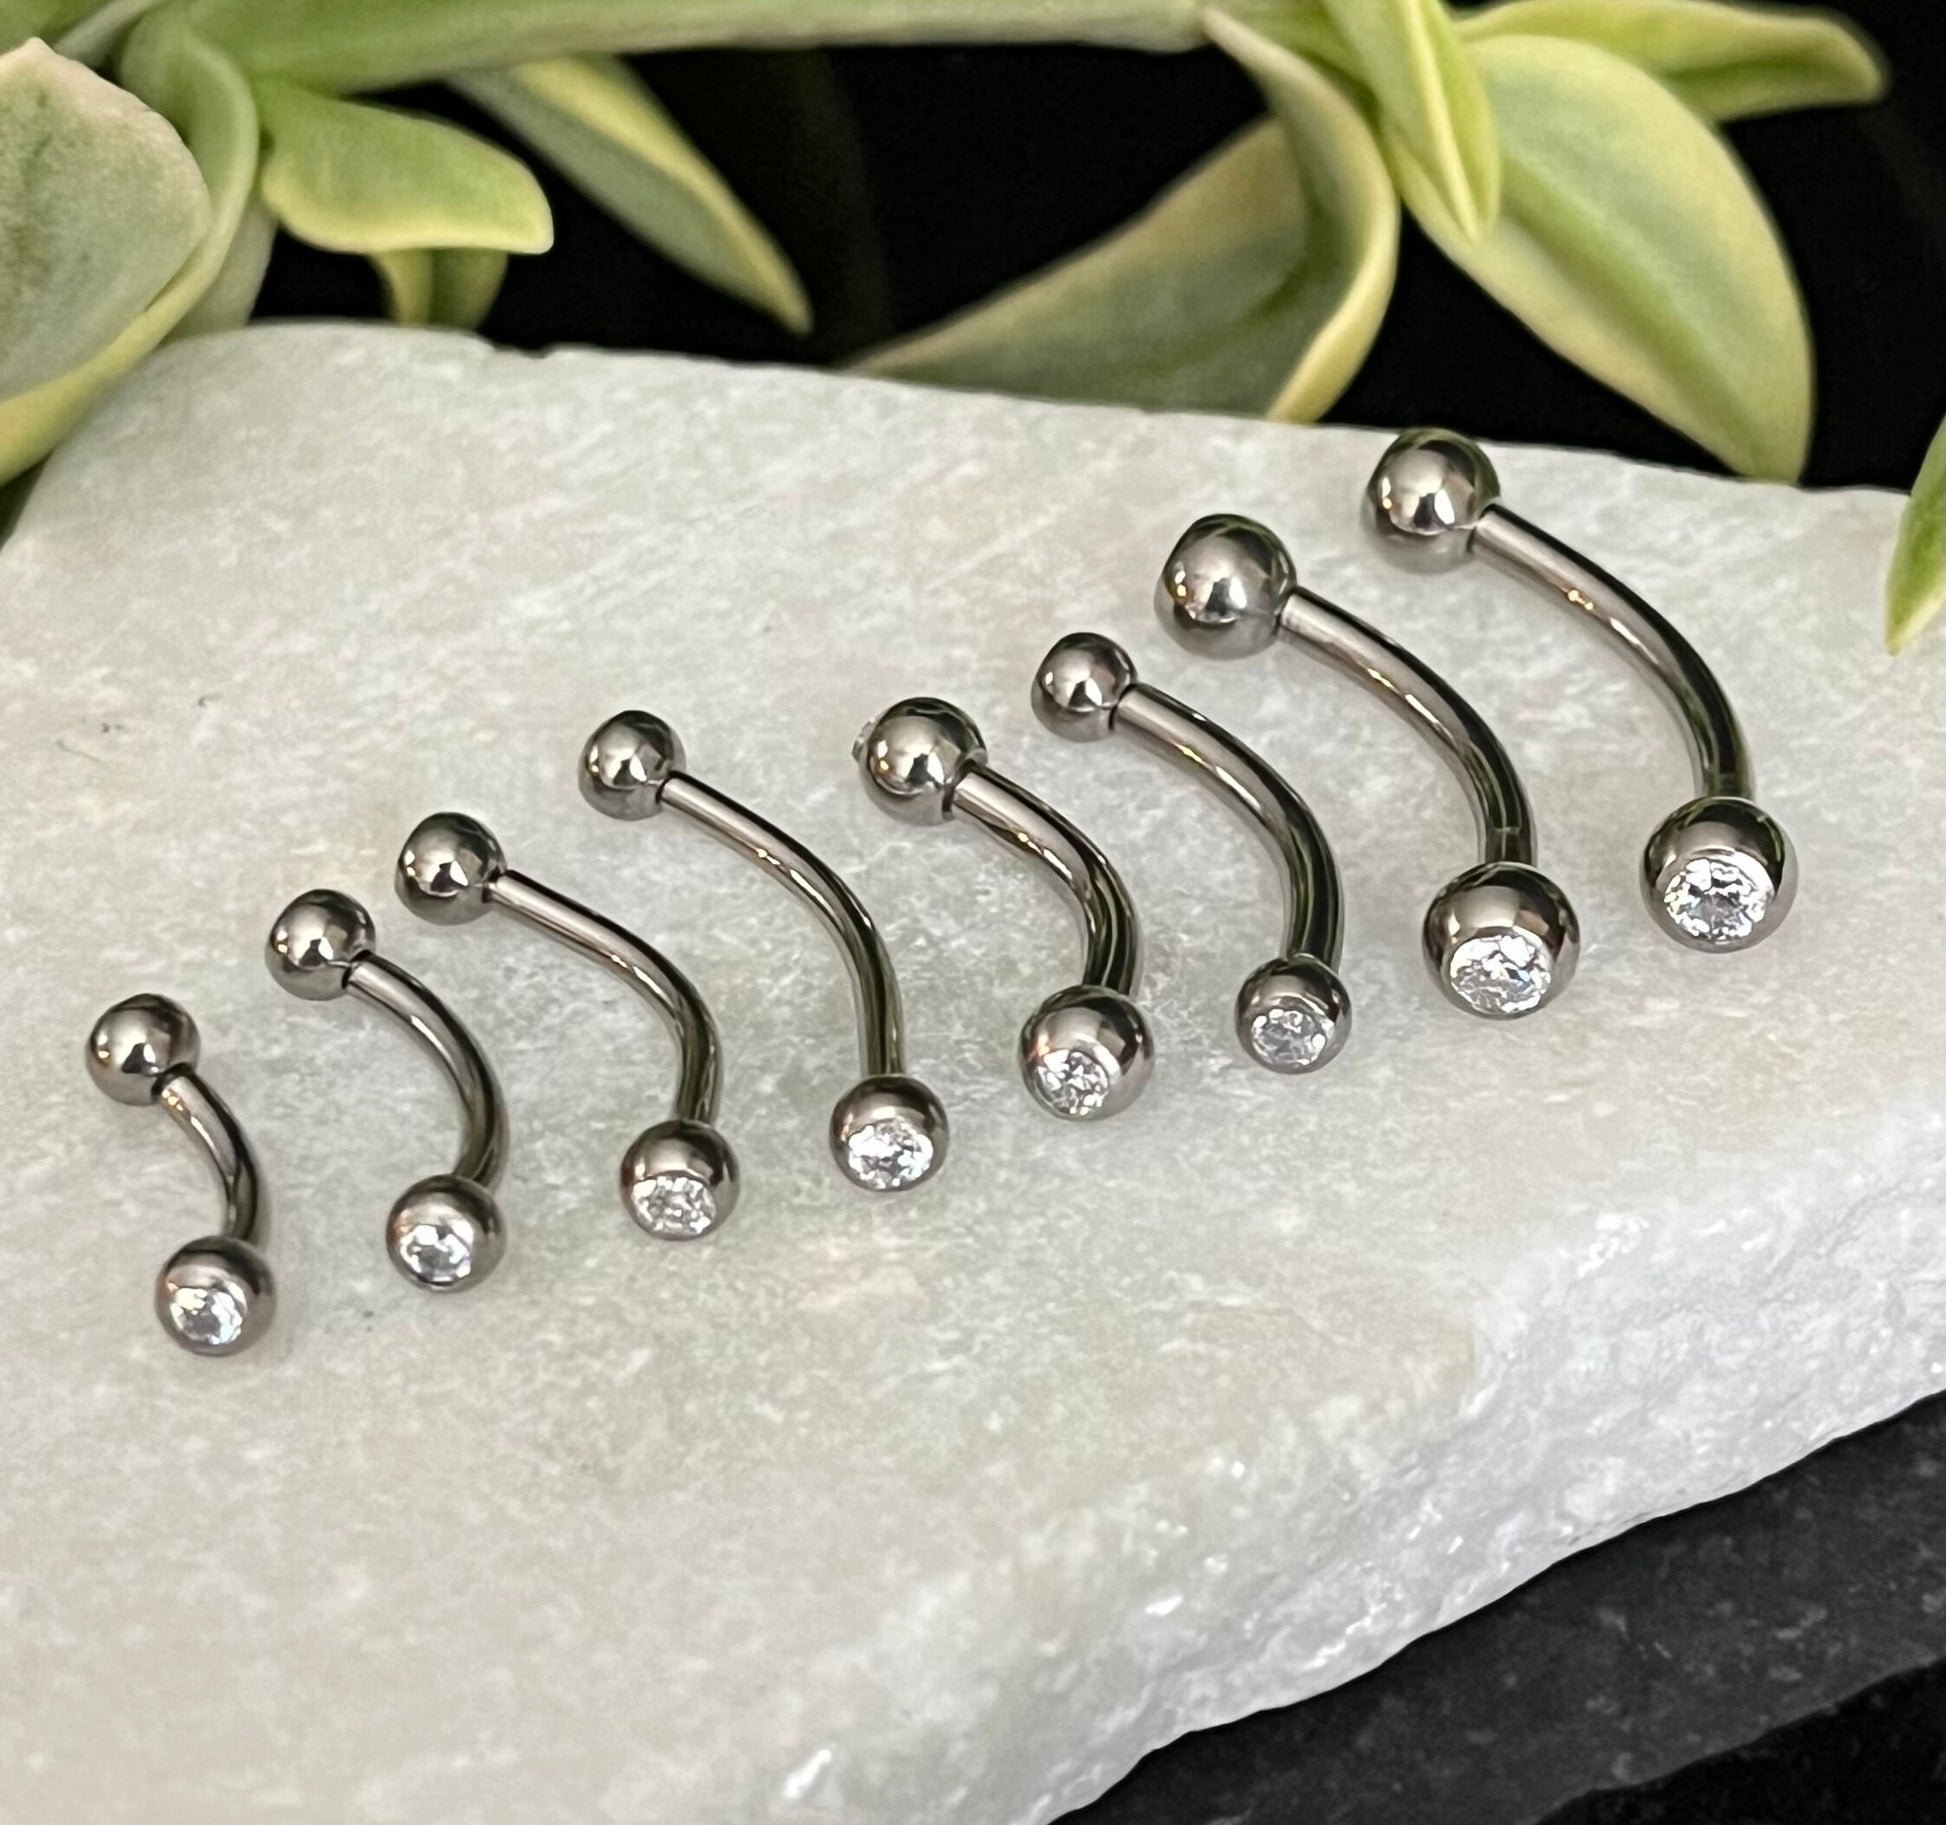 1 Piece Gemmed Internally Threaded G23 Solid Titanium Curved Barbell Eyebrow Ring - 16g or 14g - 6mm, 8mm, 10mm, 11mm & 12mm Available !